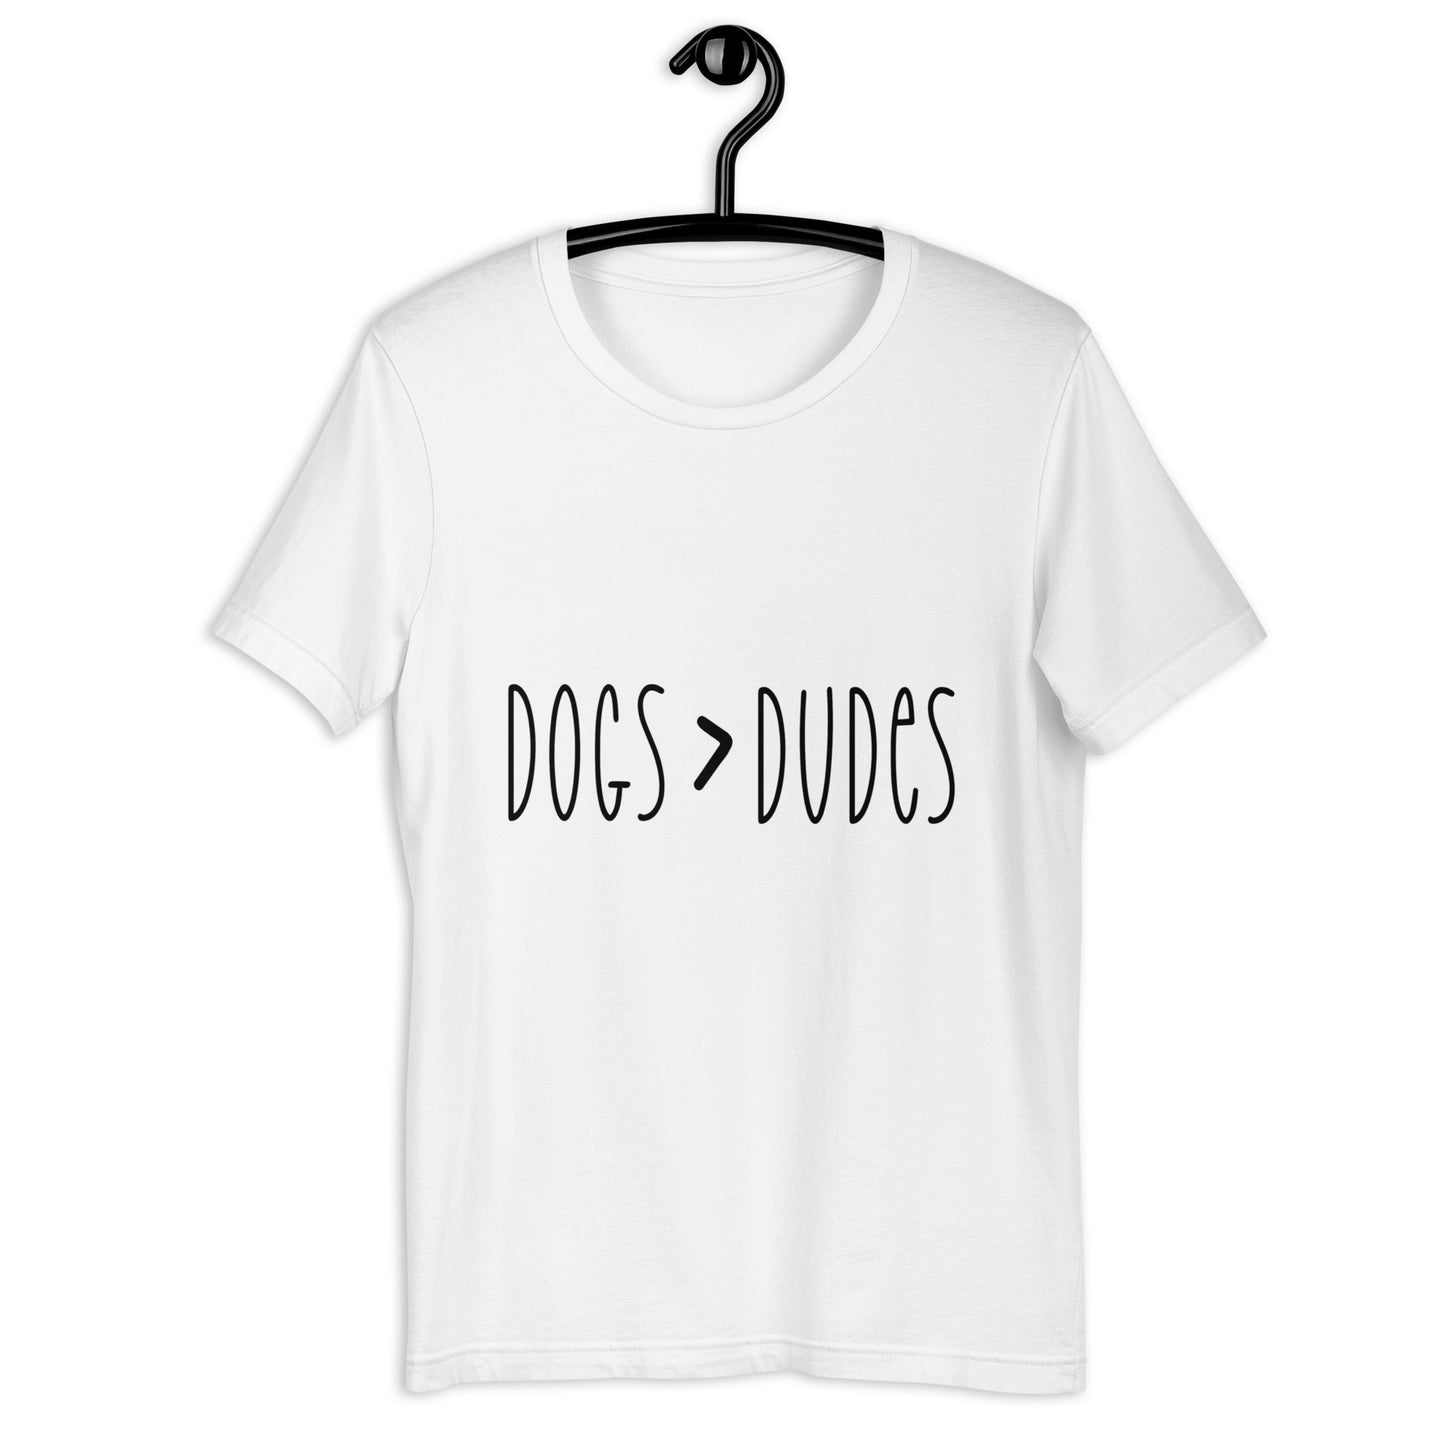 DOGS > DUDES